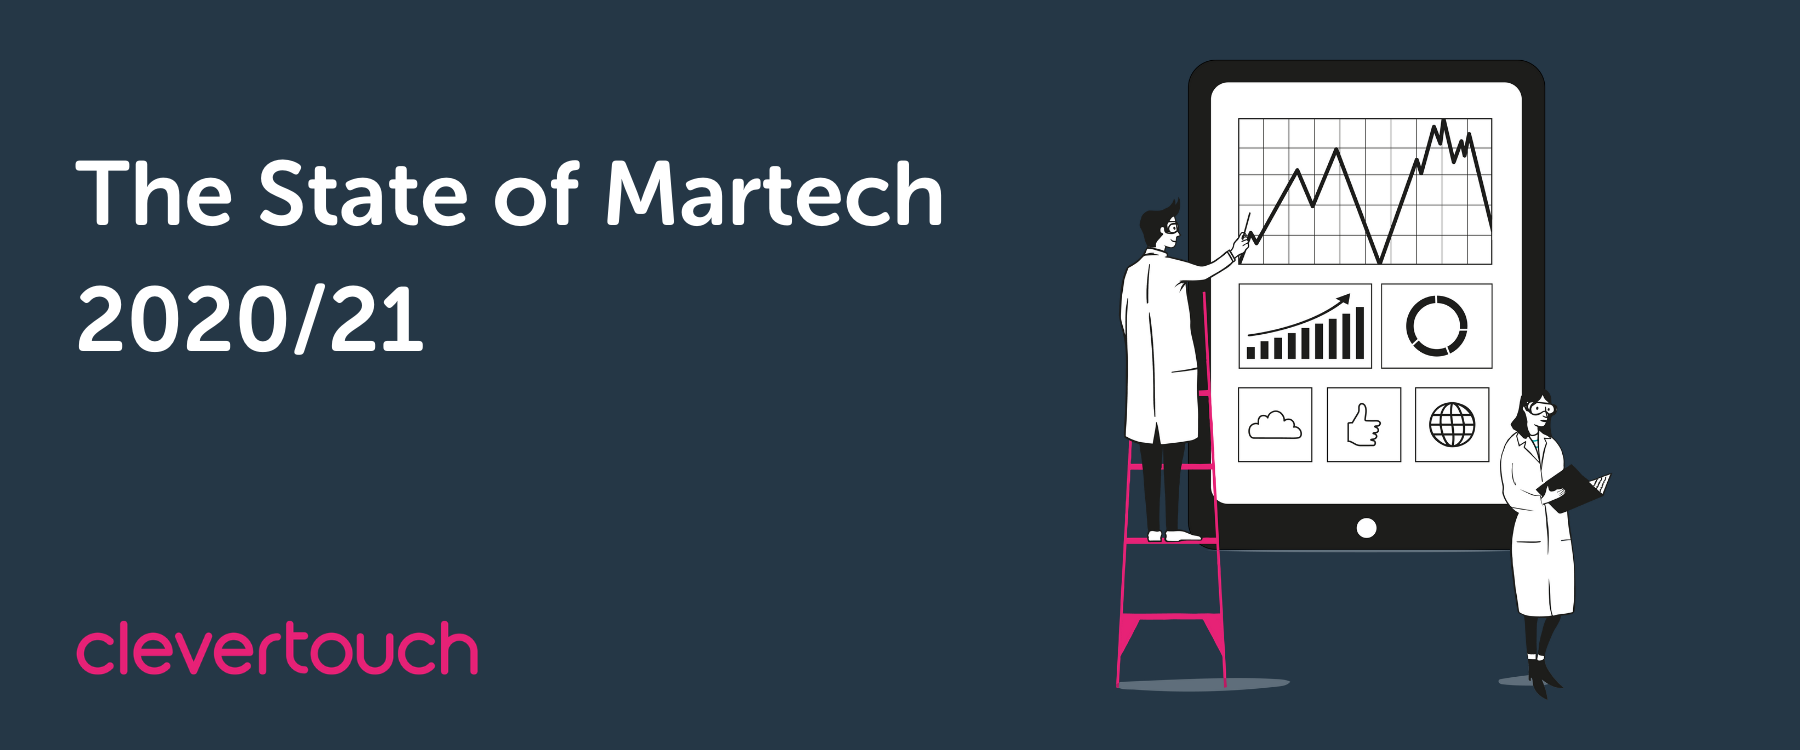 The State of Martech Report 2021 from Clevertouch